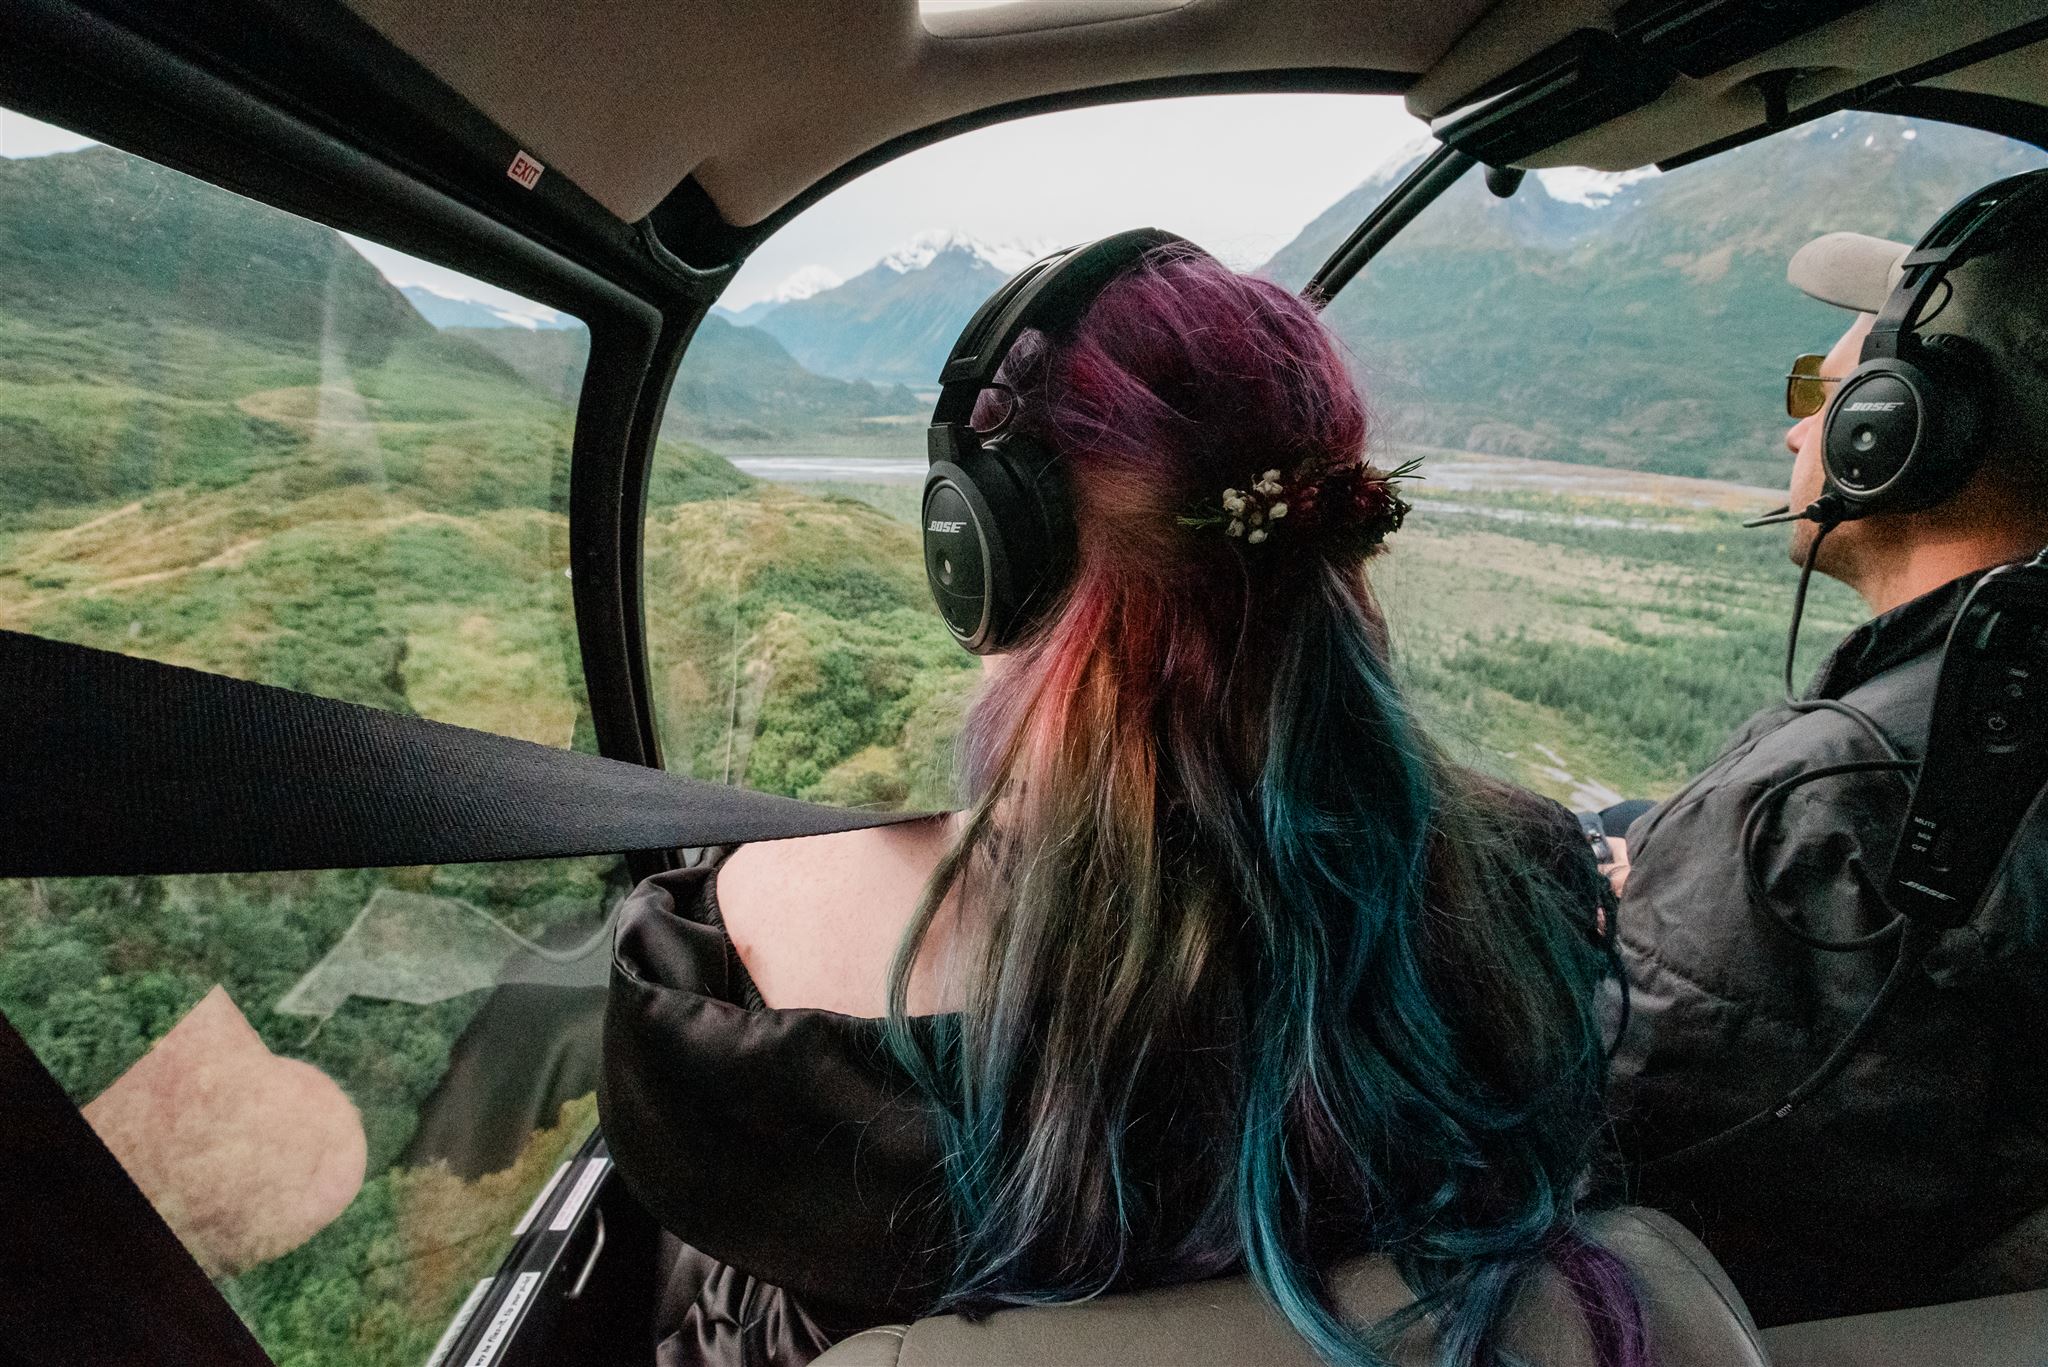 This is a picture of a bride riding in a helicopter. She is sitting in the front looking out at the vast mountain view. You can see the captain next to her flying the helicopter.